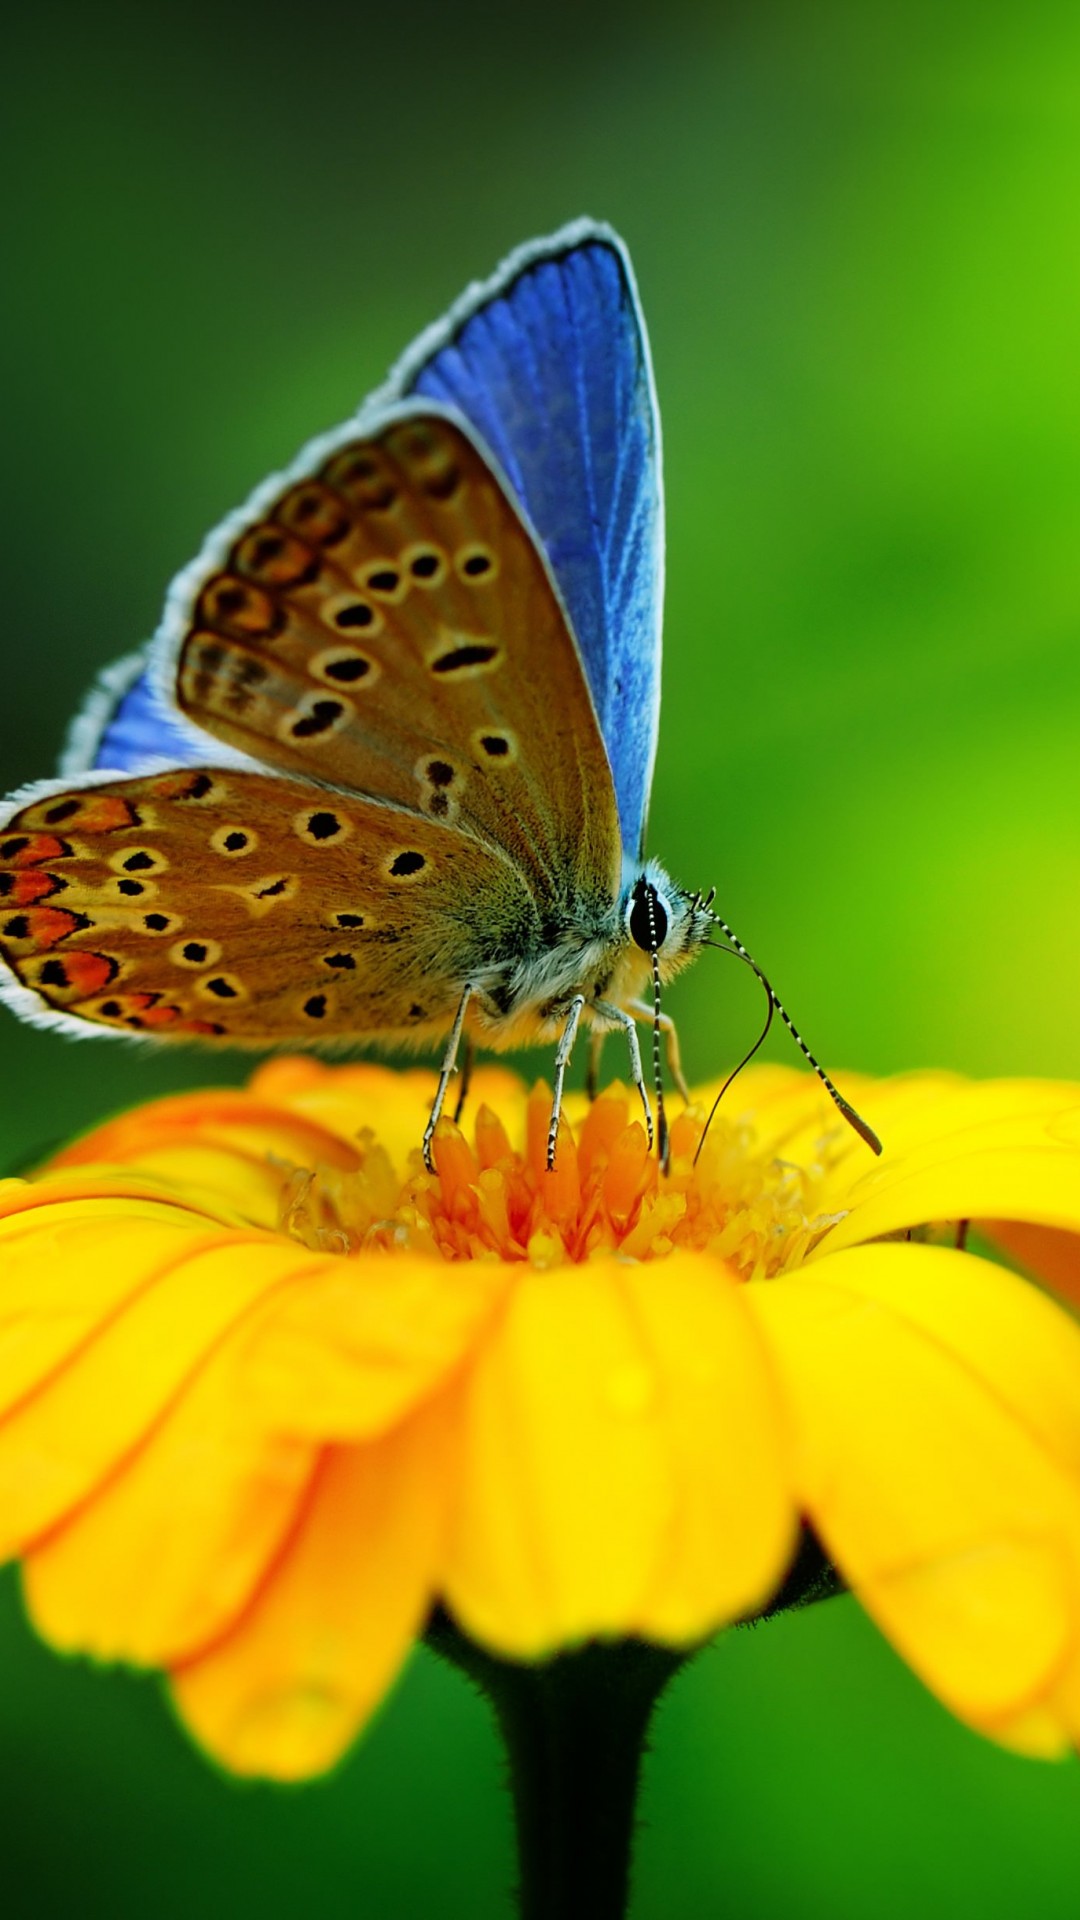 Butterfly Collecting Pollen Wallpaper for LG G2